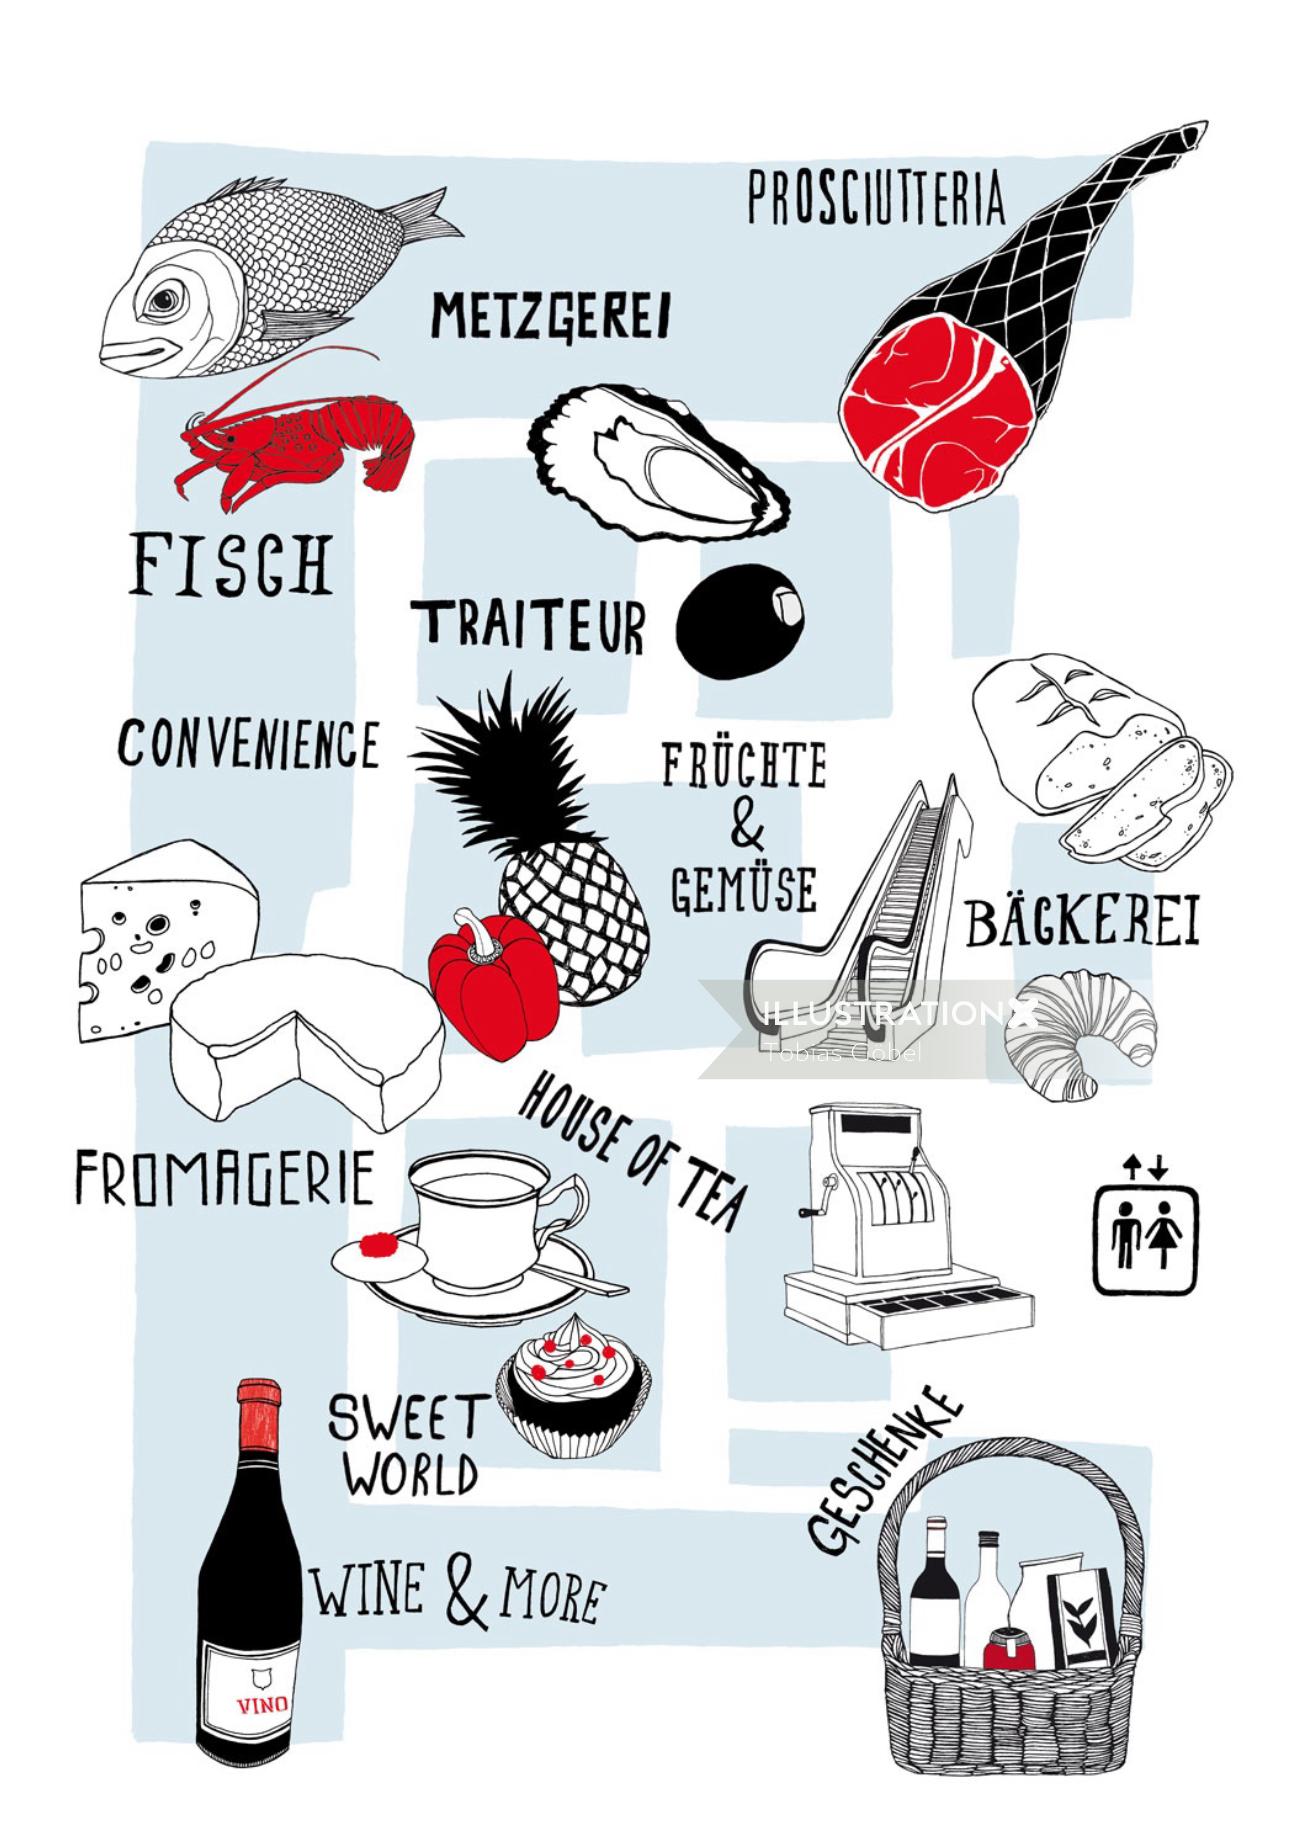 infographic of food
